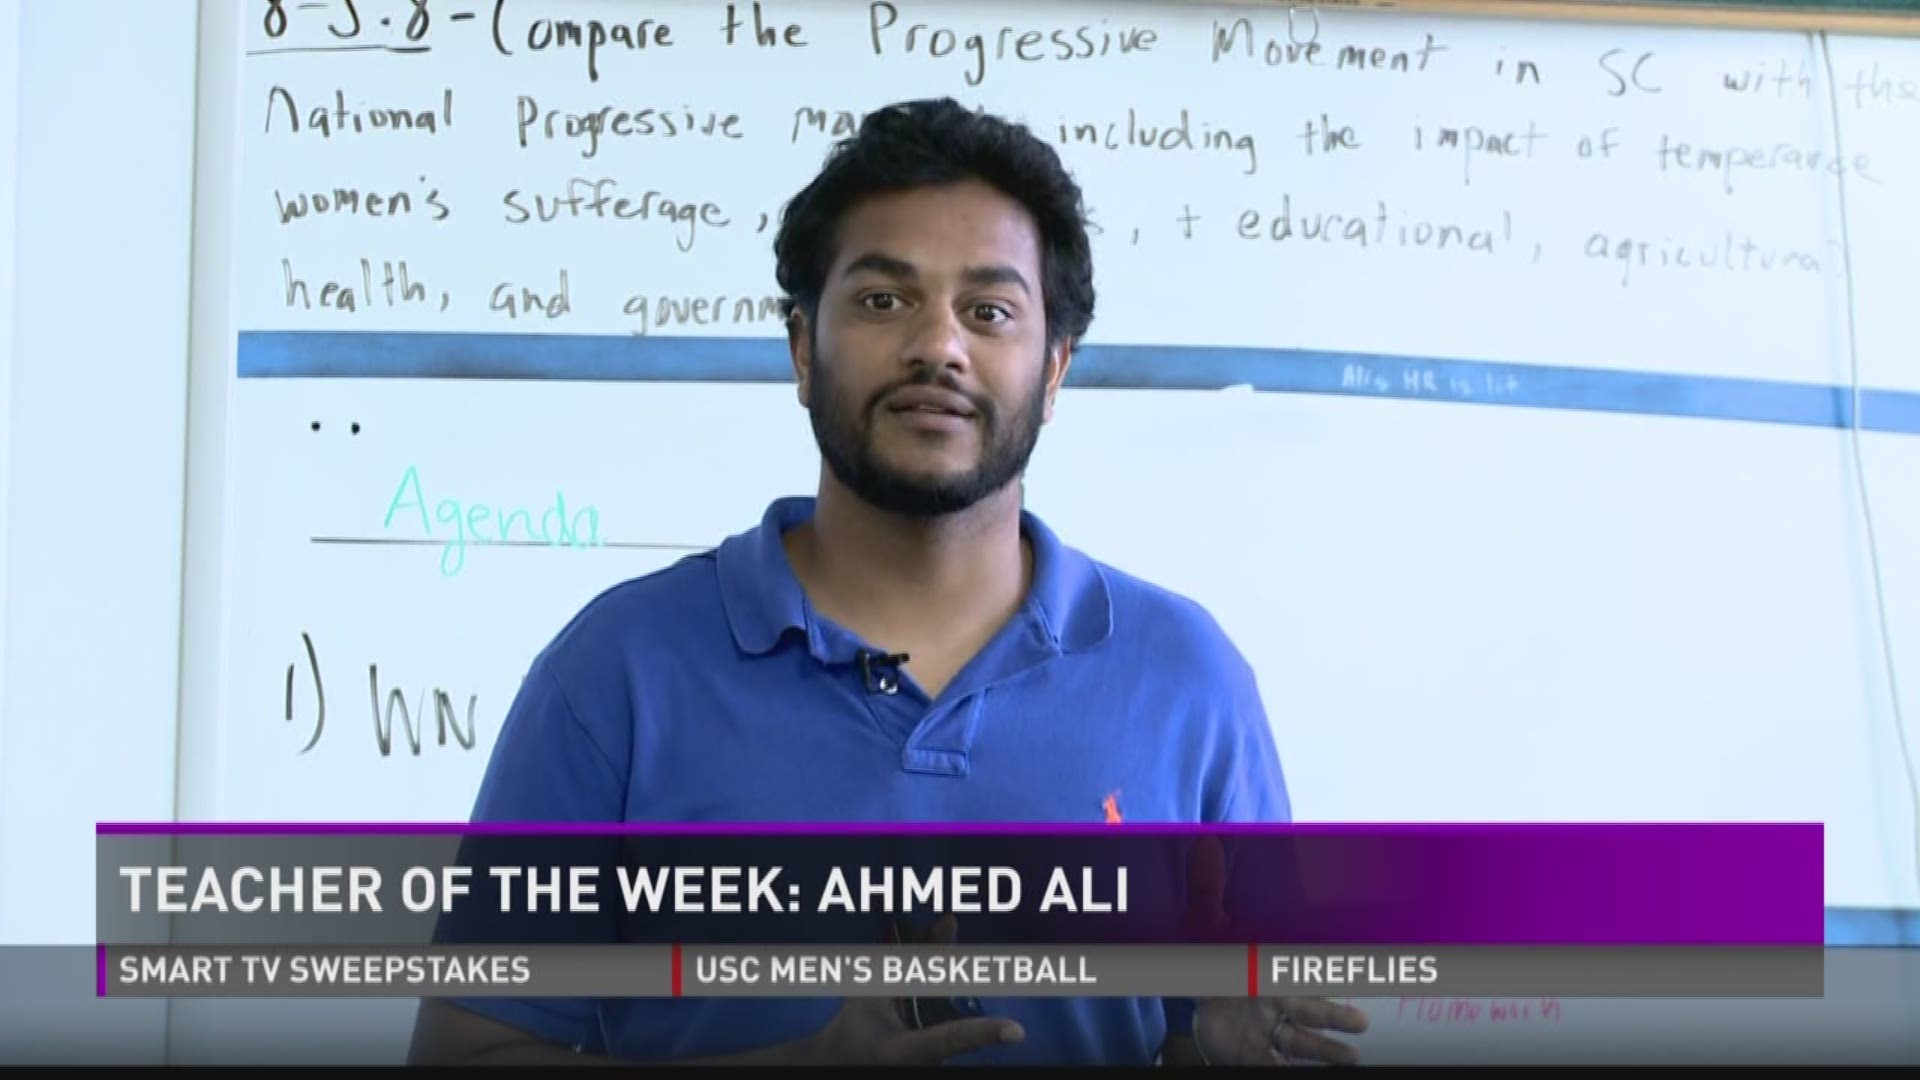 Meet Ahmed Ali, Our Teacher of the Week. A graduate of Richland District 2, Ali is an 8th grade social studies teacher and soccer coach at Kelly Mill Middle School.